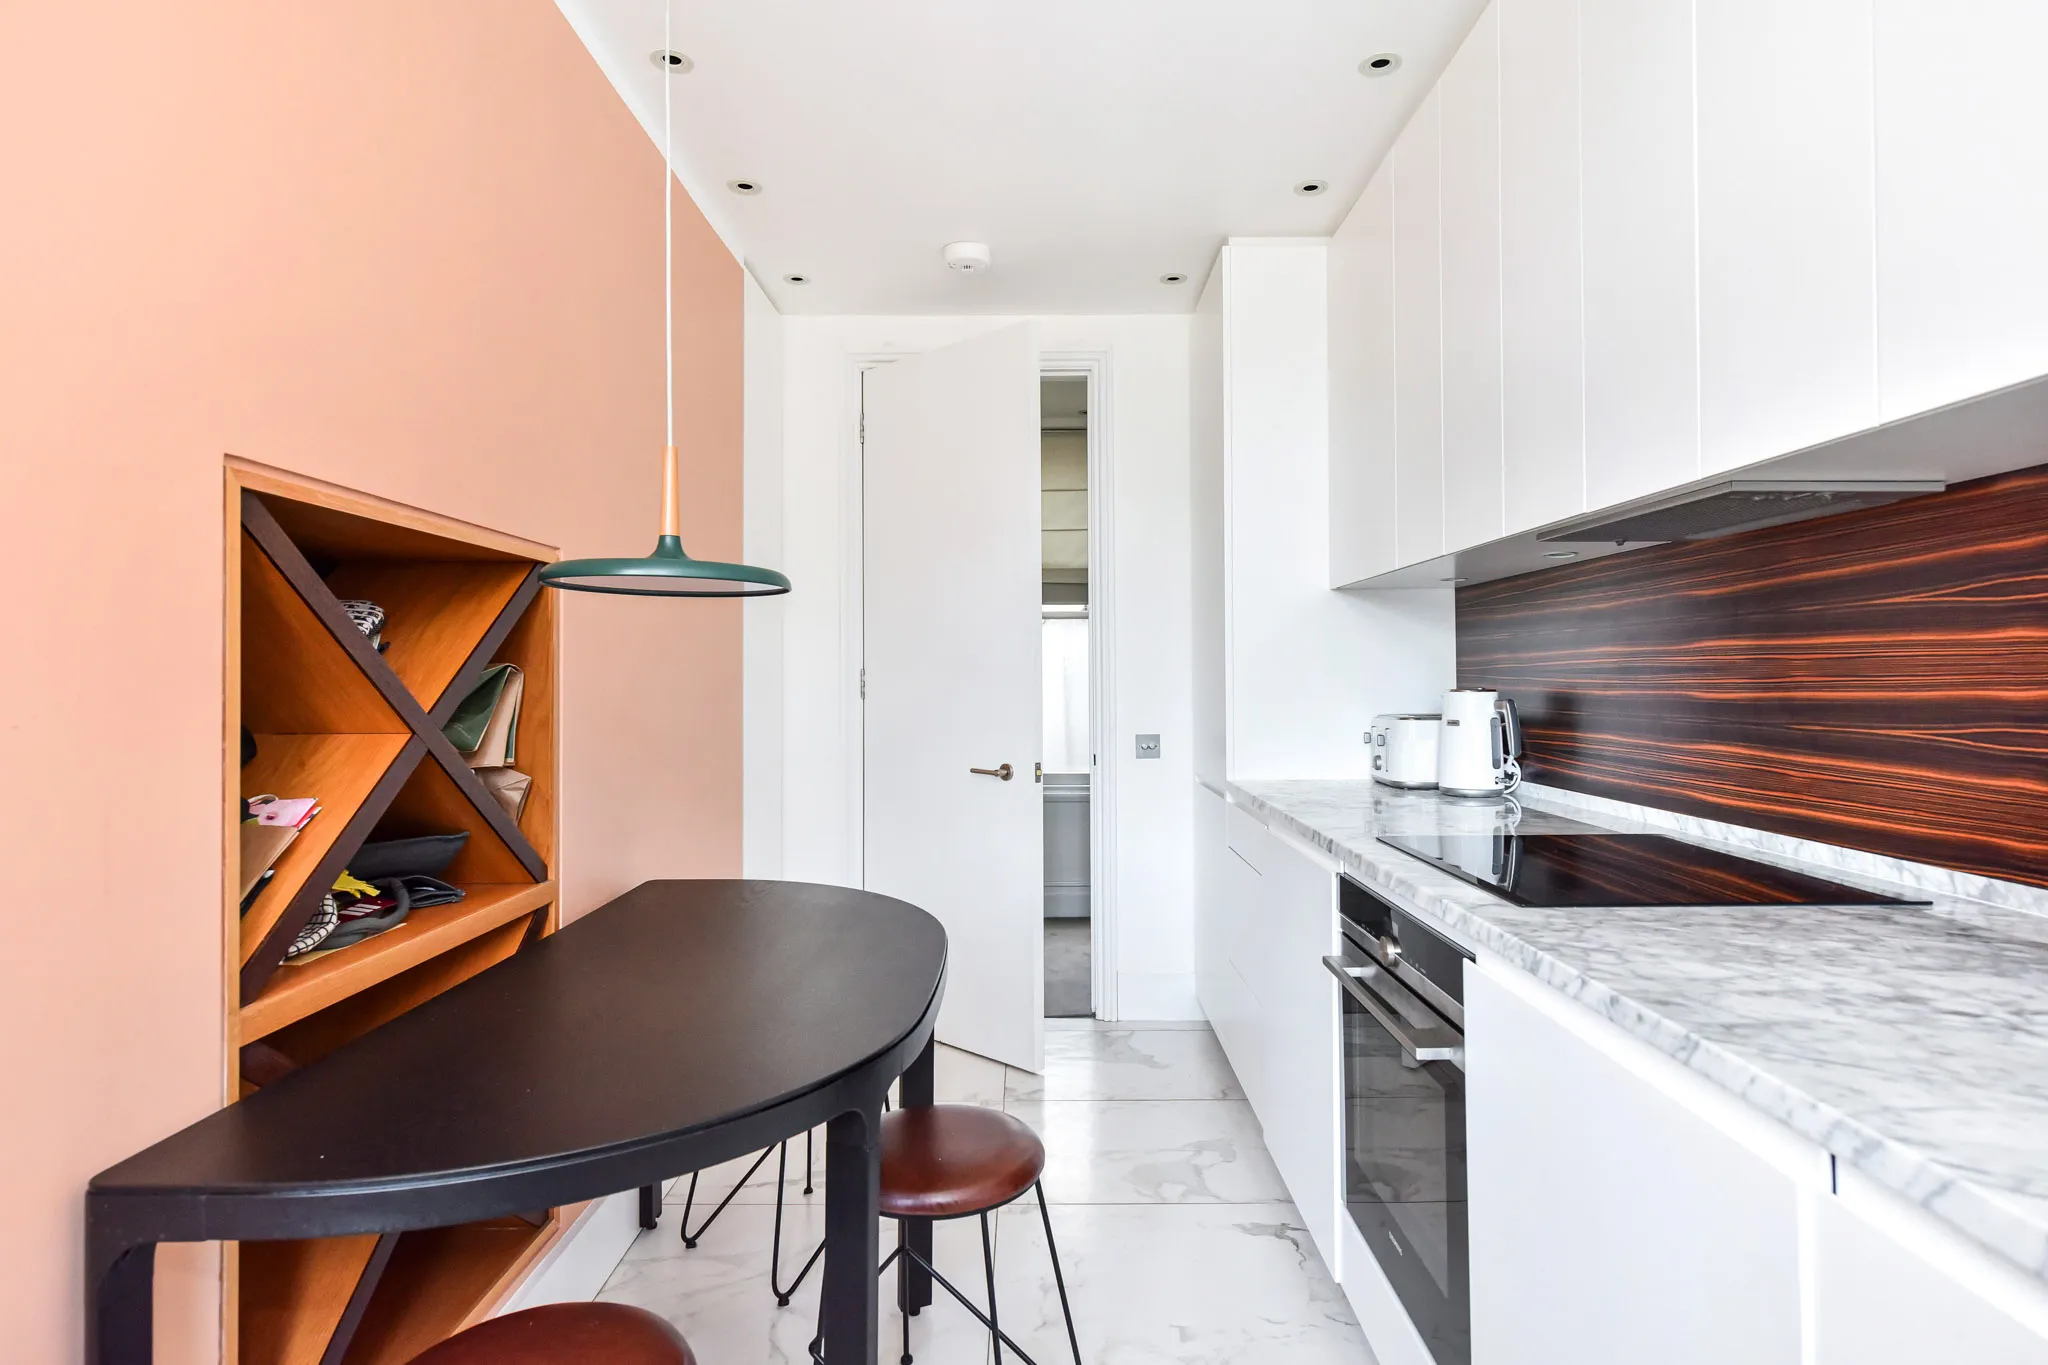 Iverna Court, holiday apartment in Kensington, London